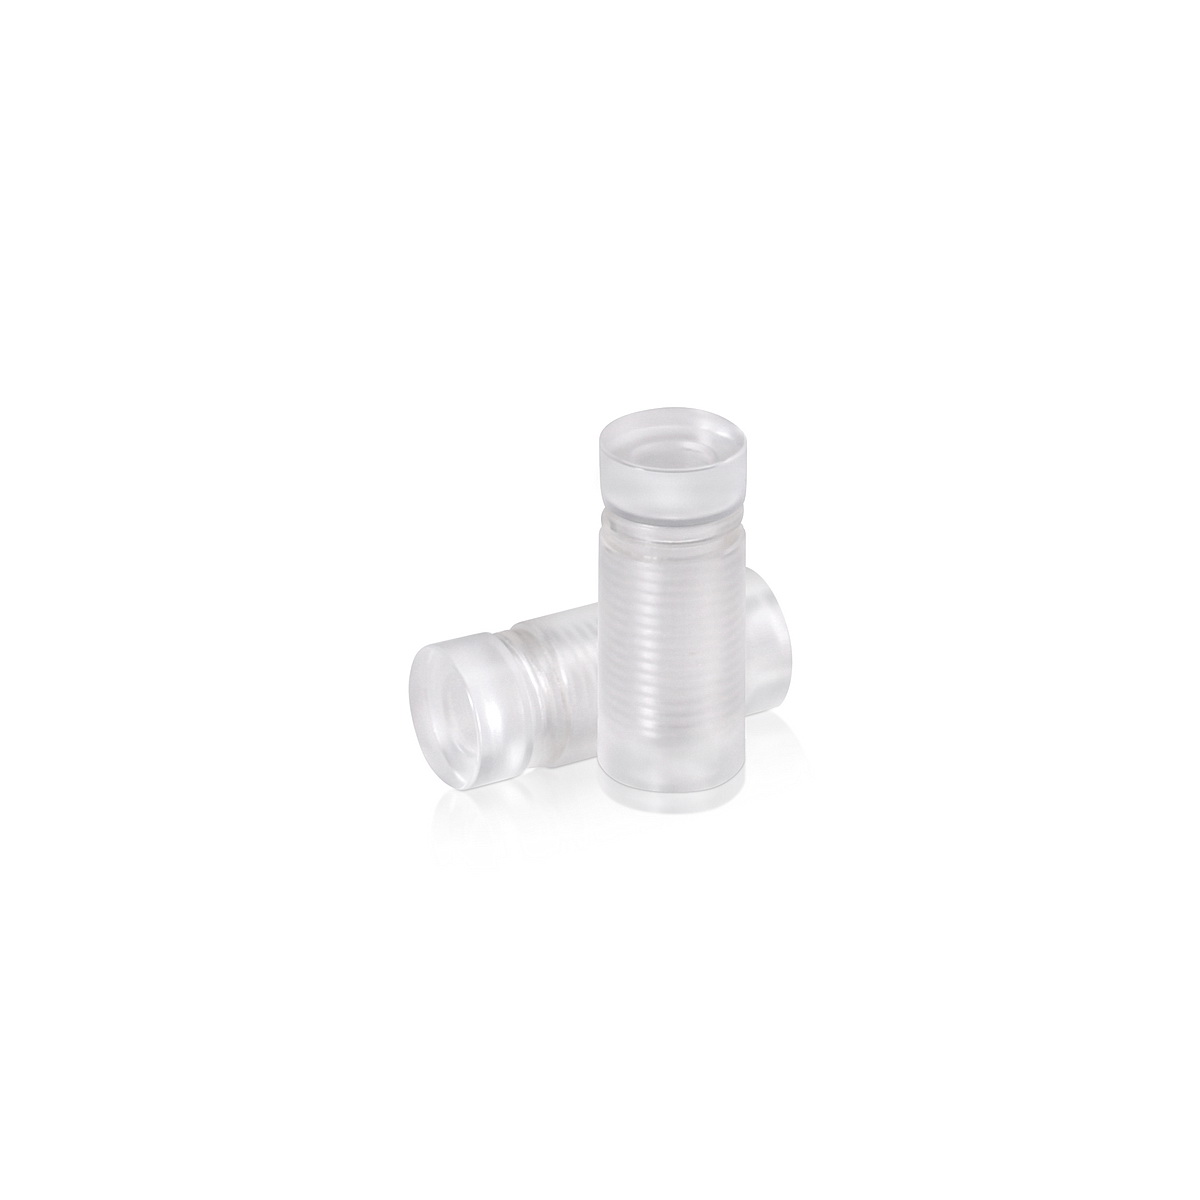 te5/8'' Diameter X 1'' Barrel Length, Clear Acrylic Standoff. Easy Fasten Standoff (For Inside Use Only) Tamper Proof [Required Material Hole Size: 3/8'']